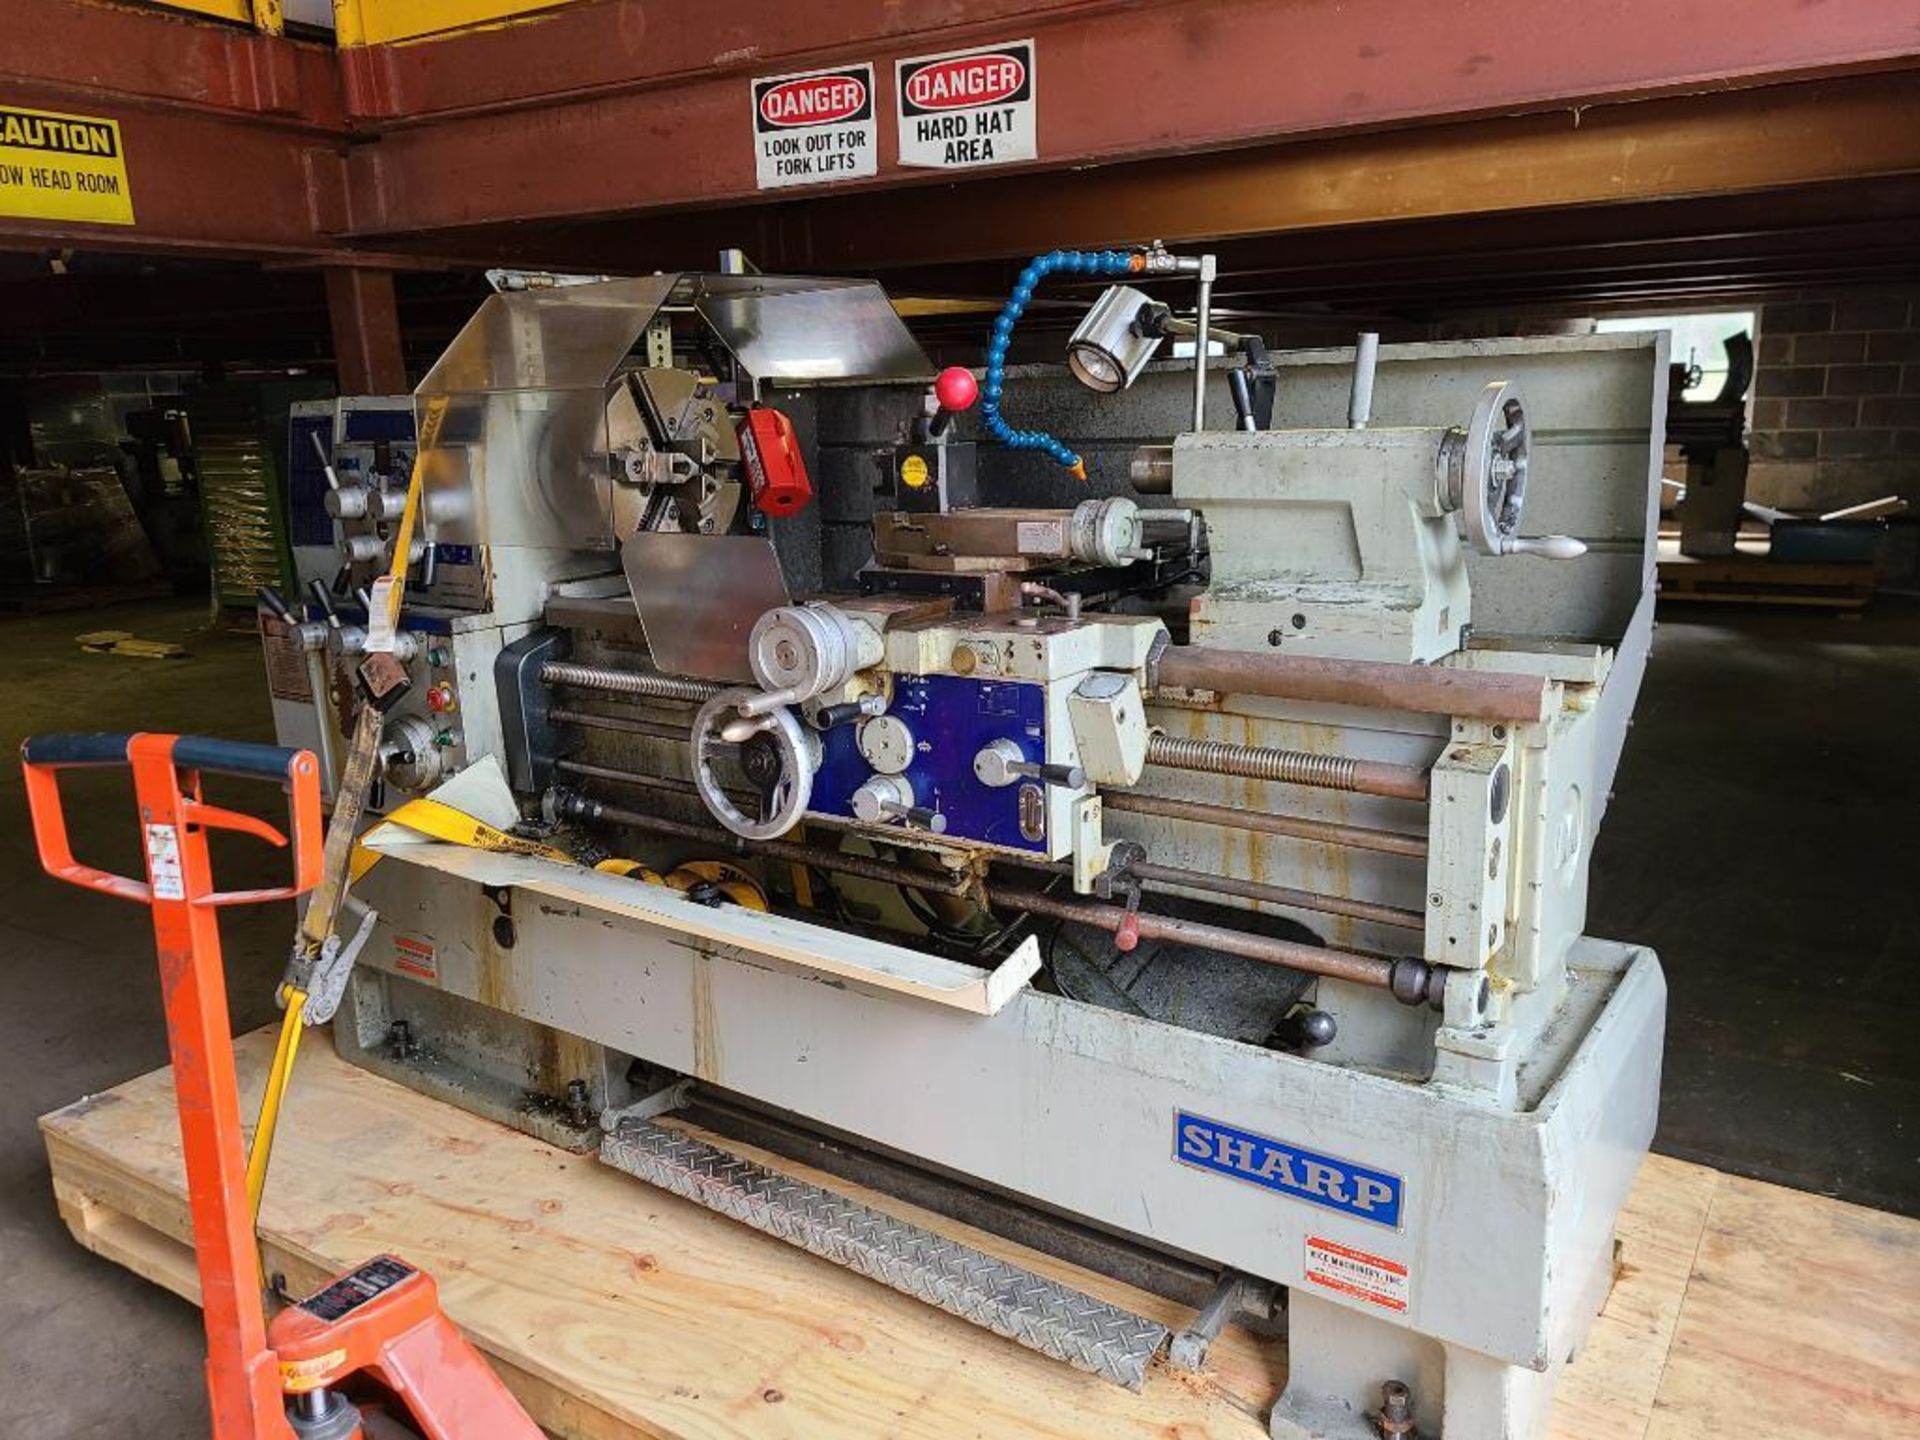 2003 Sharp 1640 Engine Lathe with Digital Readout - Image 2 of 6